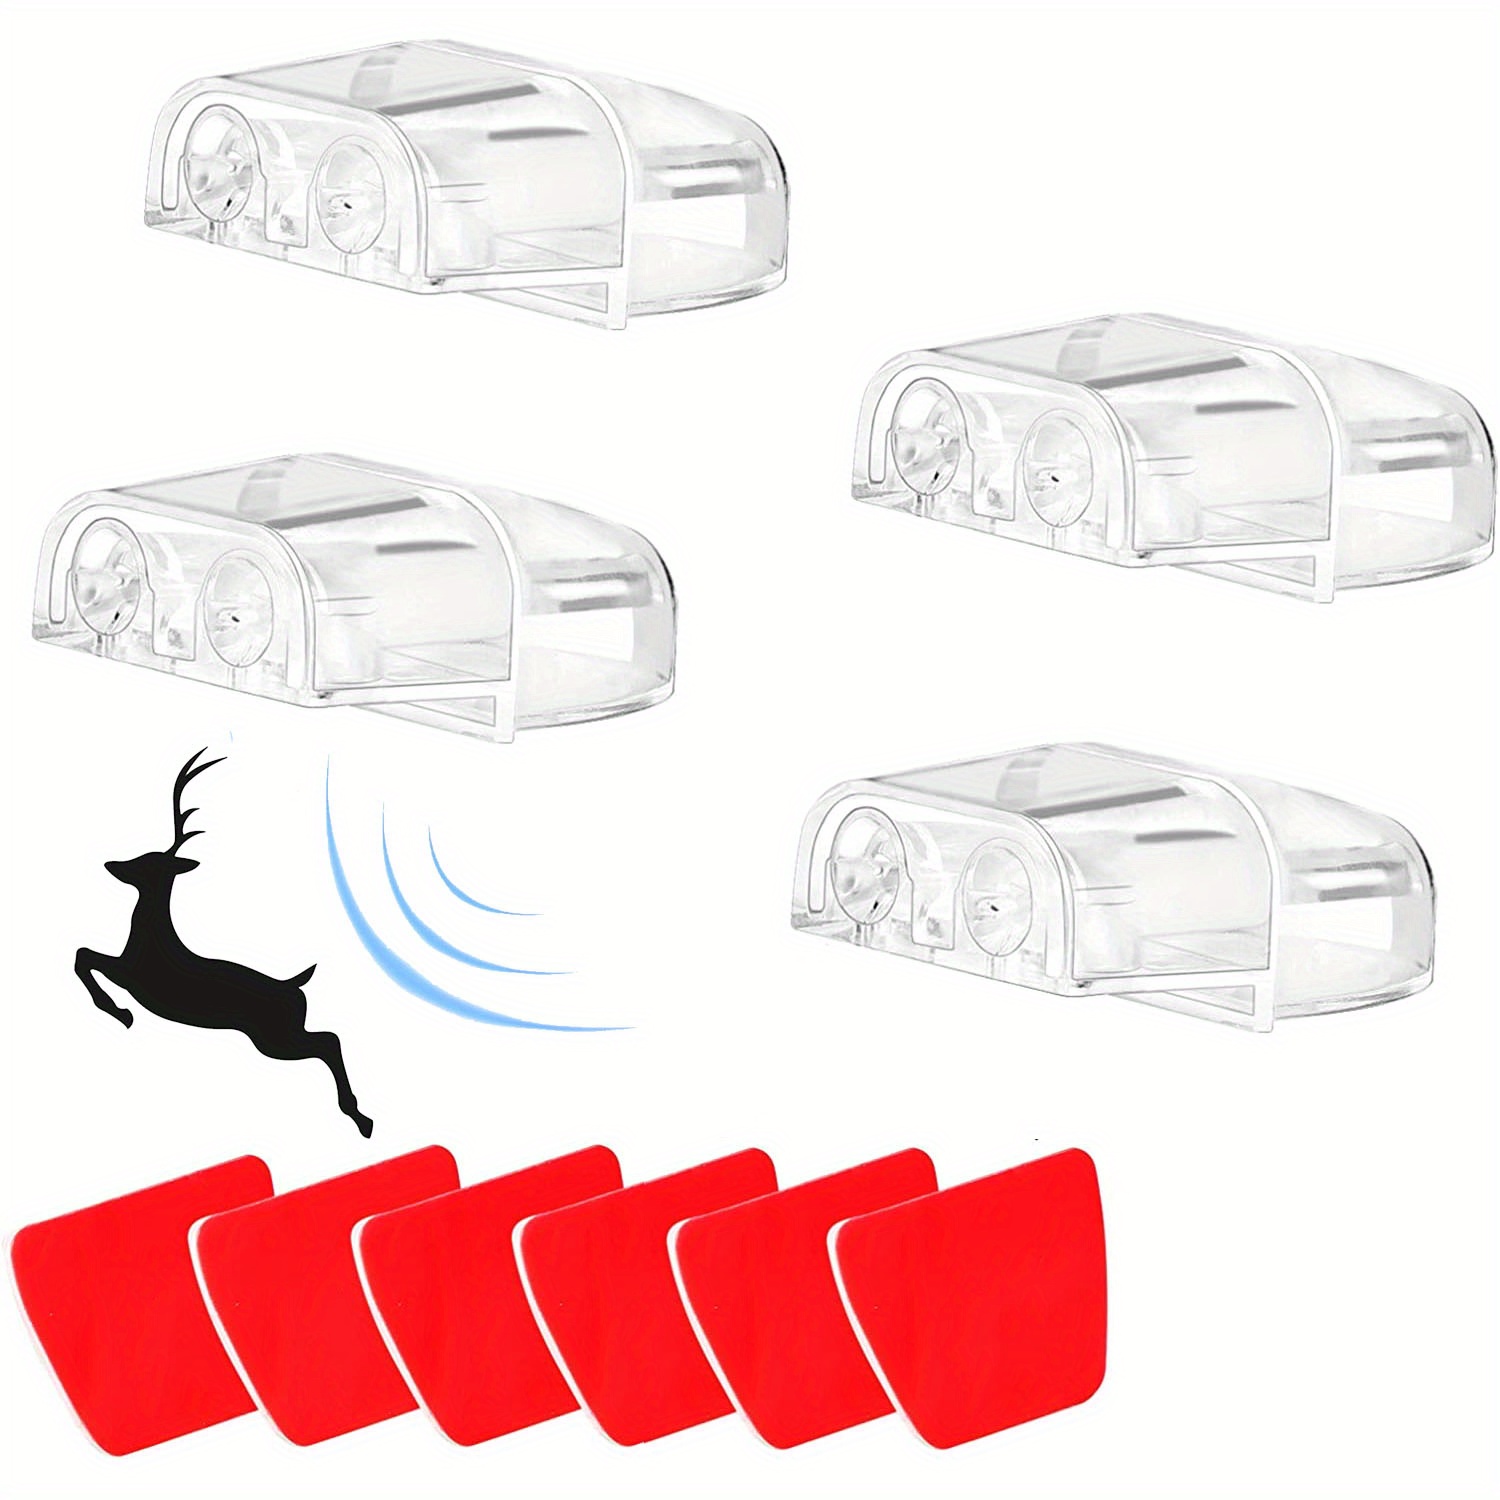 4PCS Deer Whistles for Car,Black Deer Whistles for Vehicles Protect Animal  & Avoid Collision,Animal Warning Whistle Deer Repellent Devices for Car